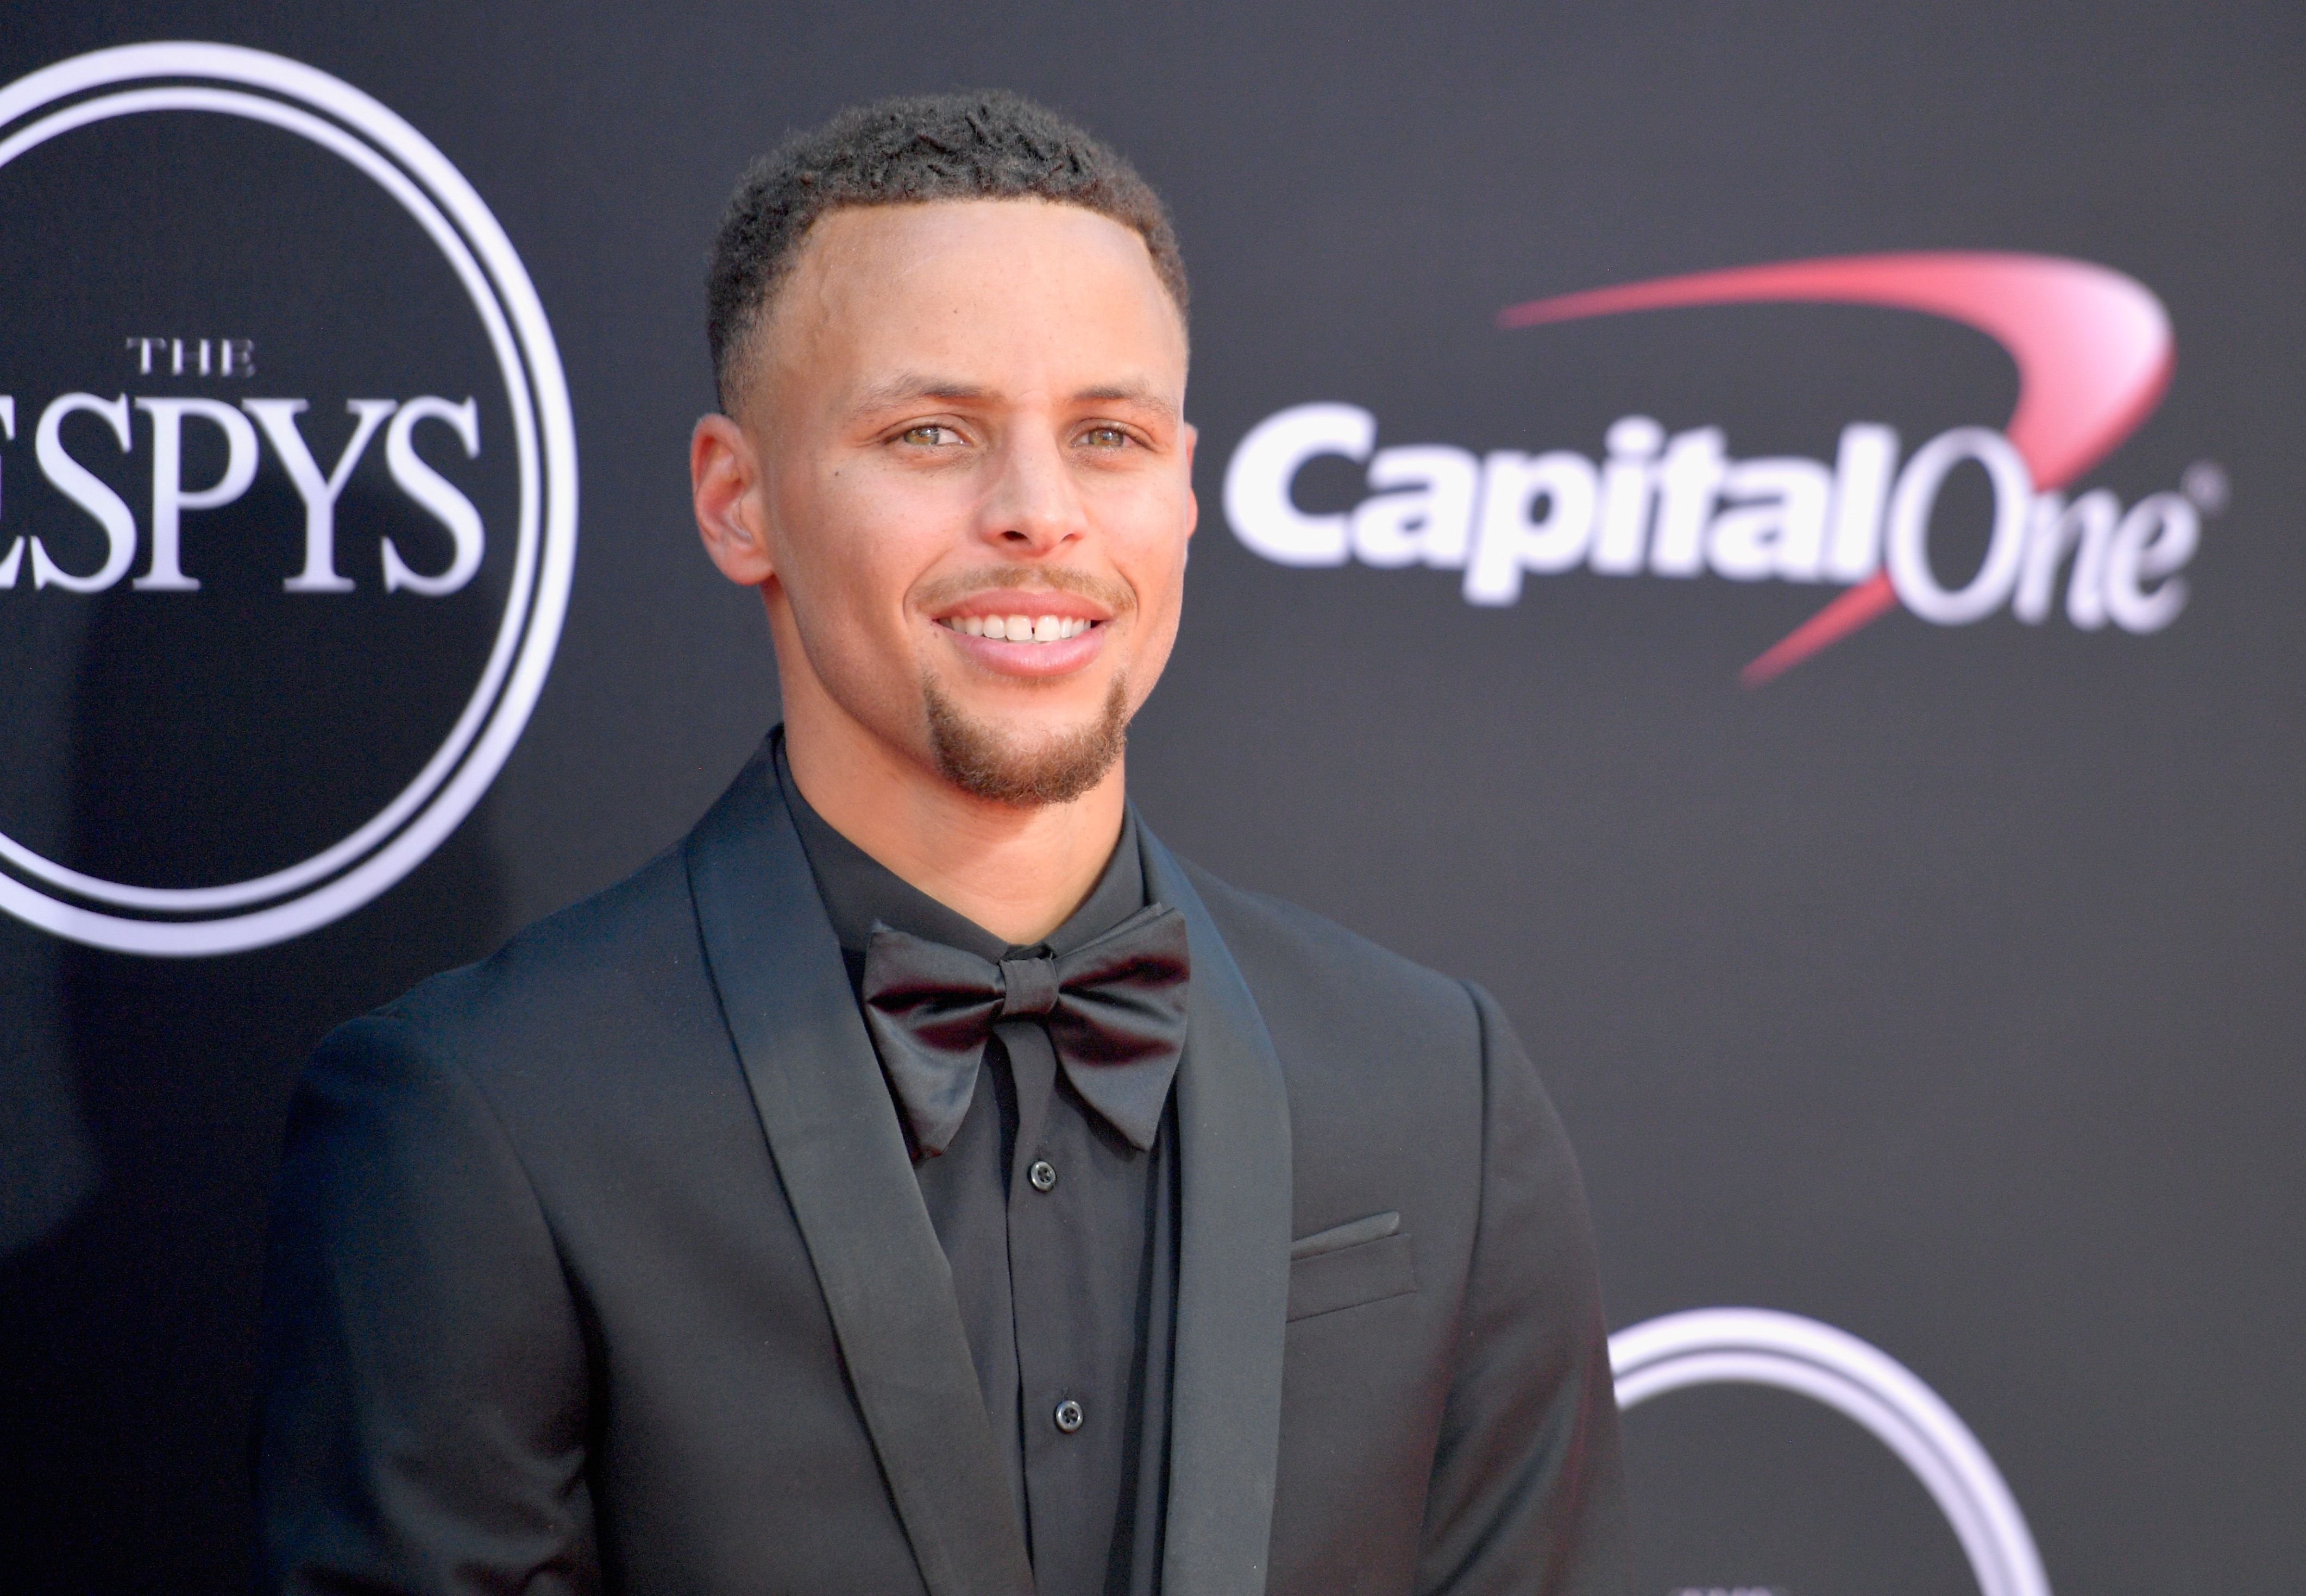 NBA player Steph Curry at the 2017 ESPYS at Microsoft Theater on July 12, 2017 | Photo: Getty Images